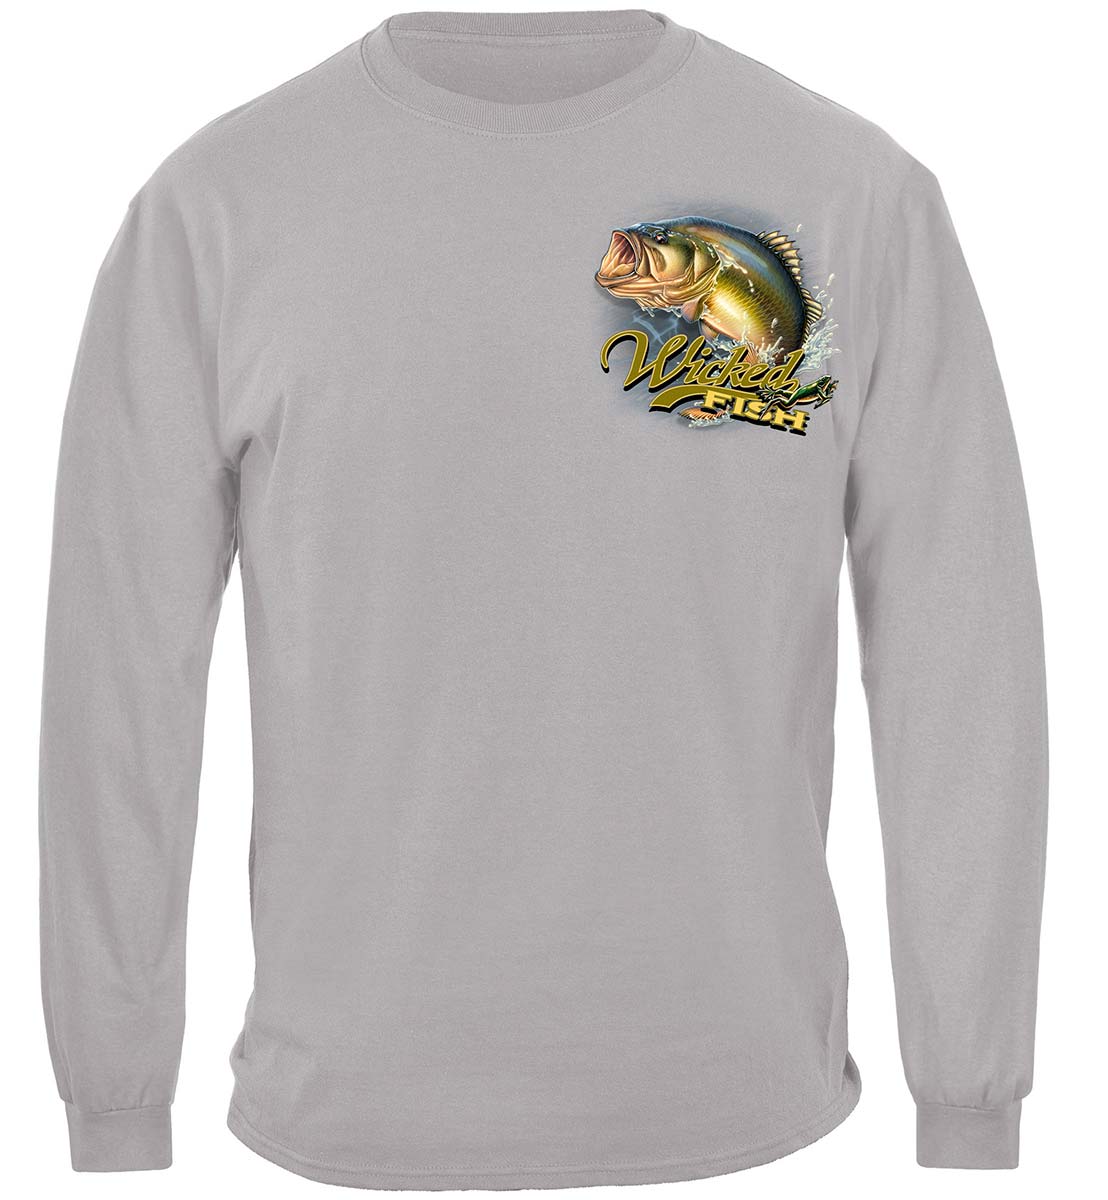 Wicked Fish Large Mouth Bass With Popper Jumping Frog Premium Long Sleeves